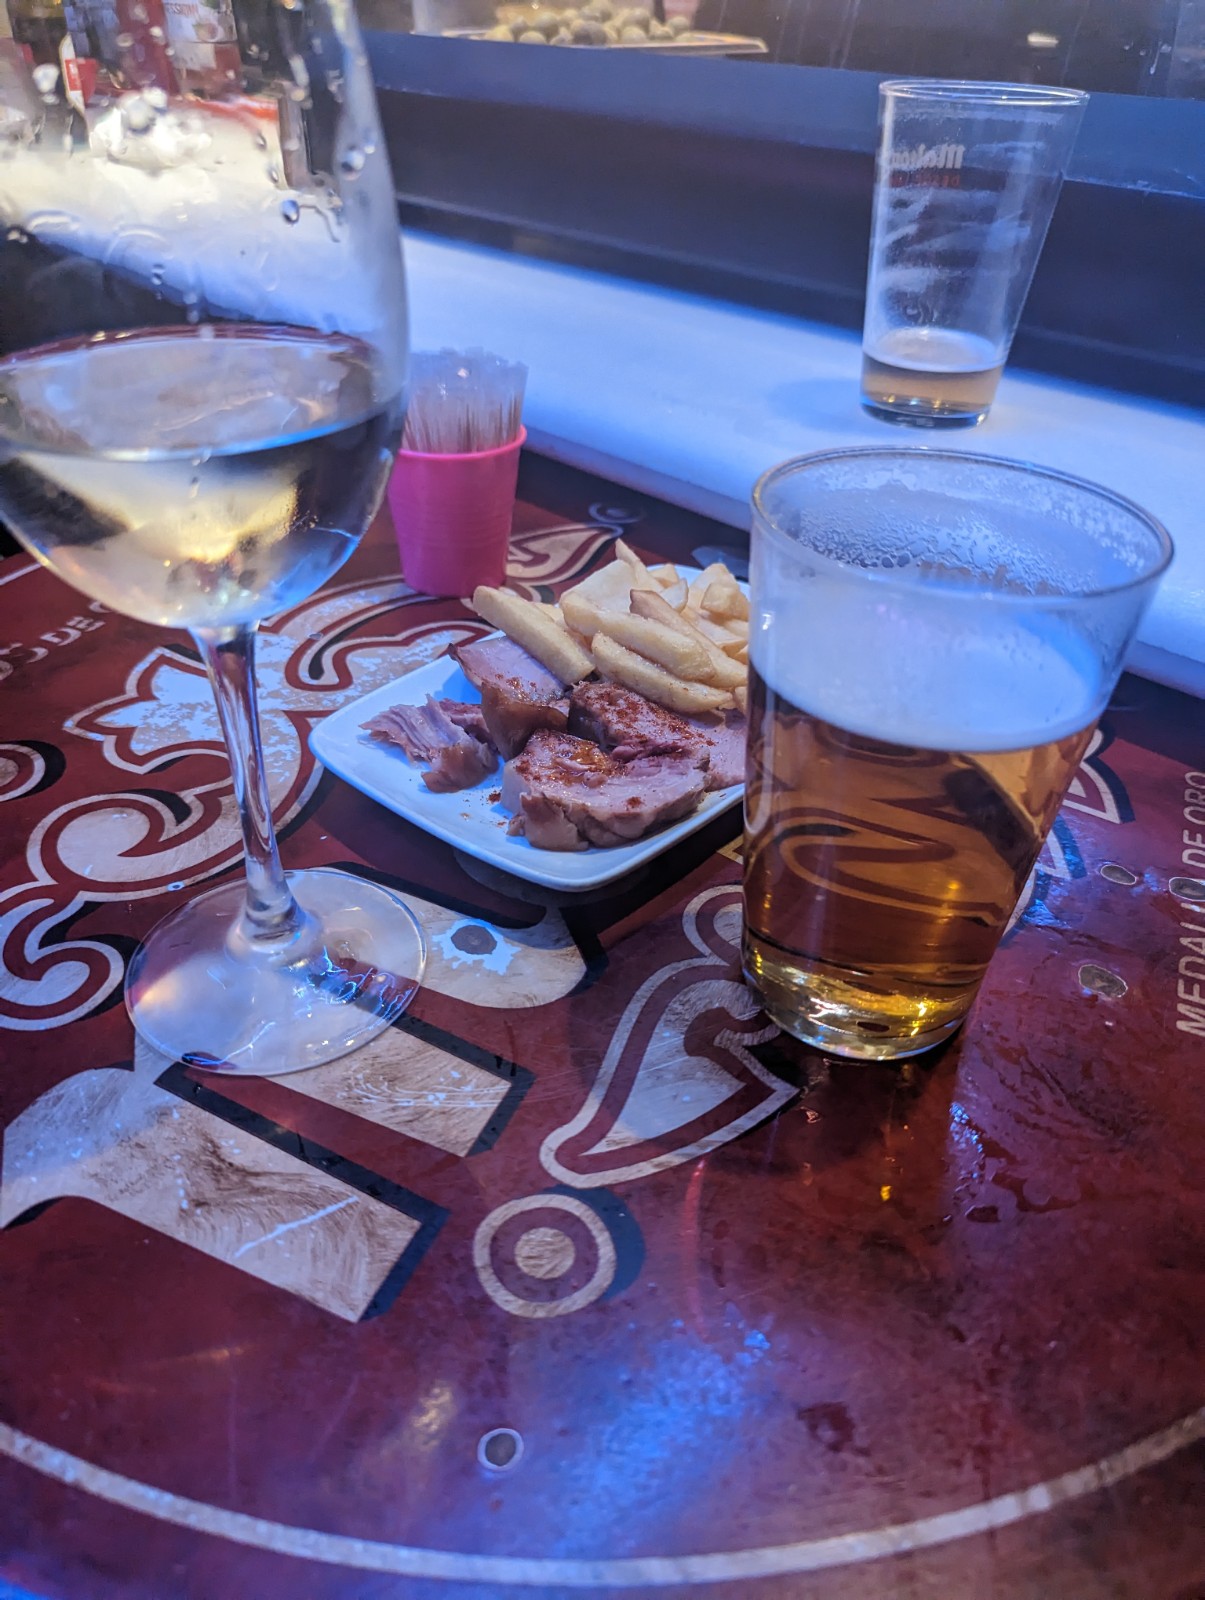 a plate of food and a glass of beer on a table